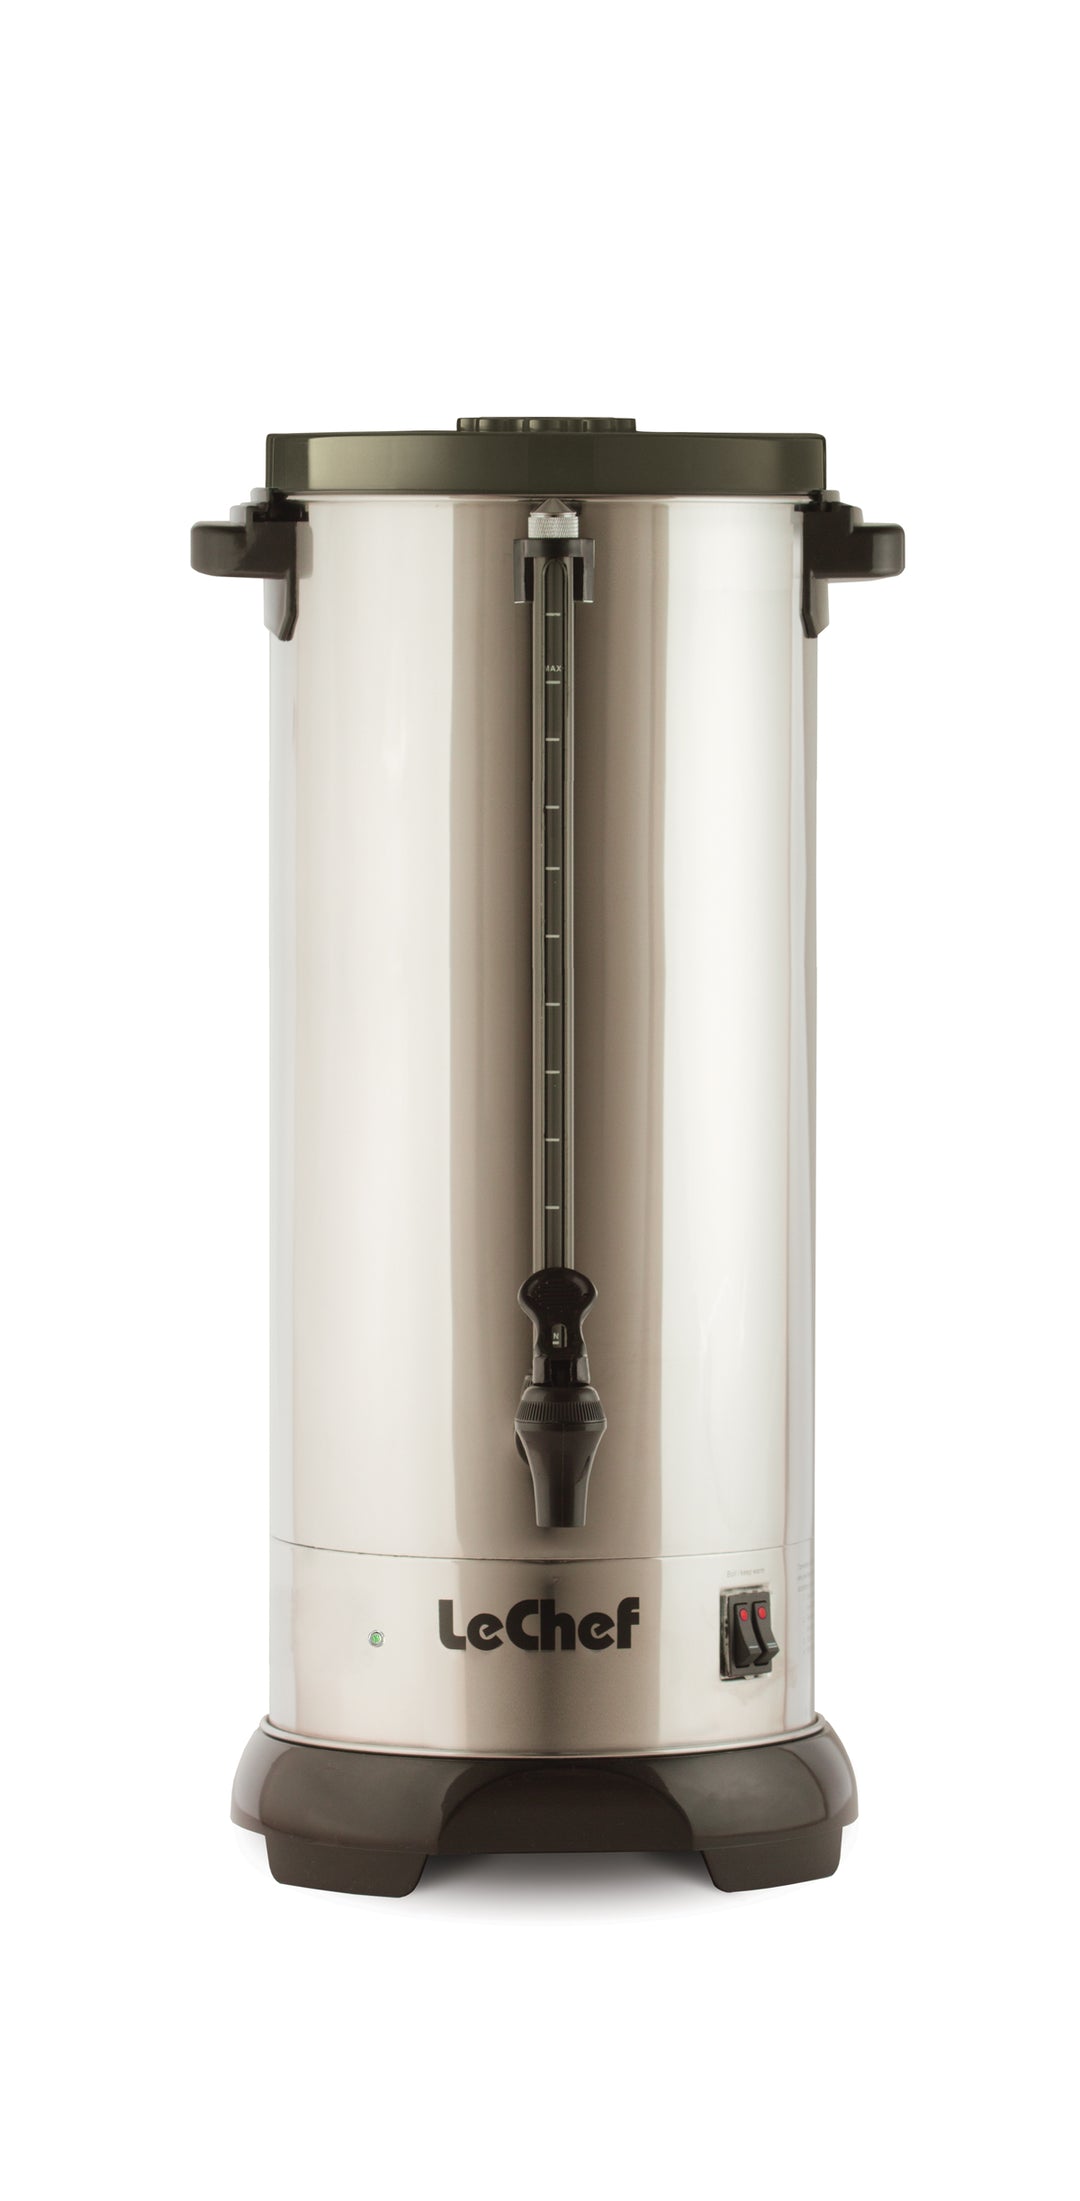 TWS Le Chef 75 Cup Urn